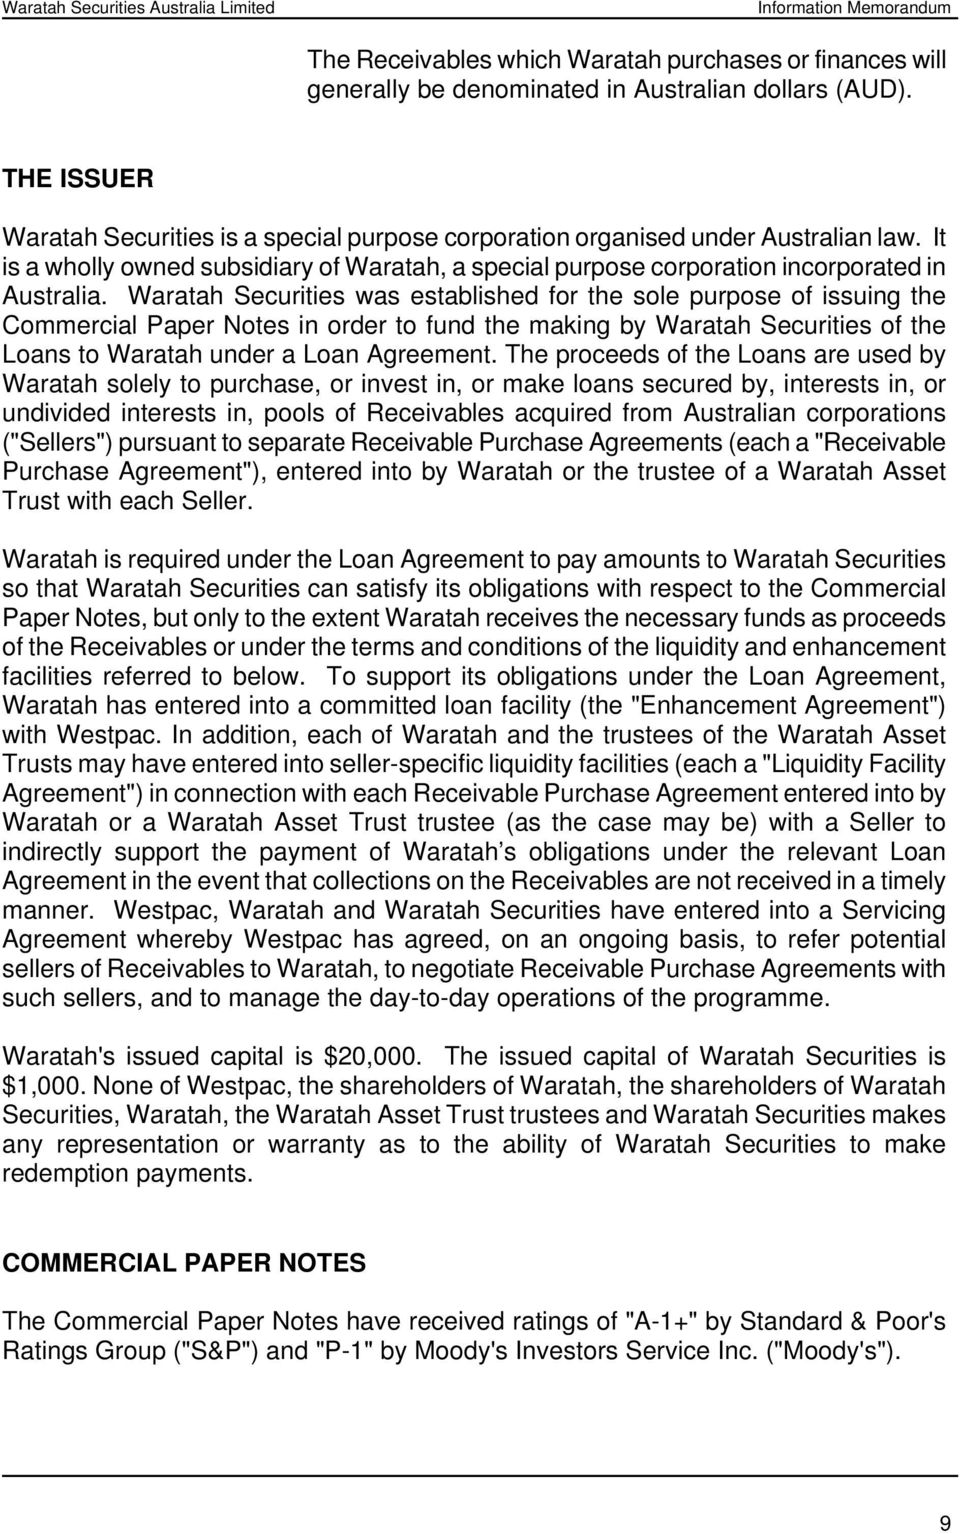 Waratah Securities was established for the sole purpose of issuing the Commercial Paper Notes in order to fund the making by Waratah Securities of the Loans to Waratah under a Loan Agreement.